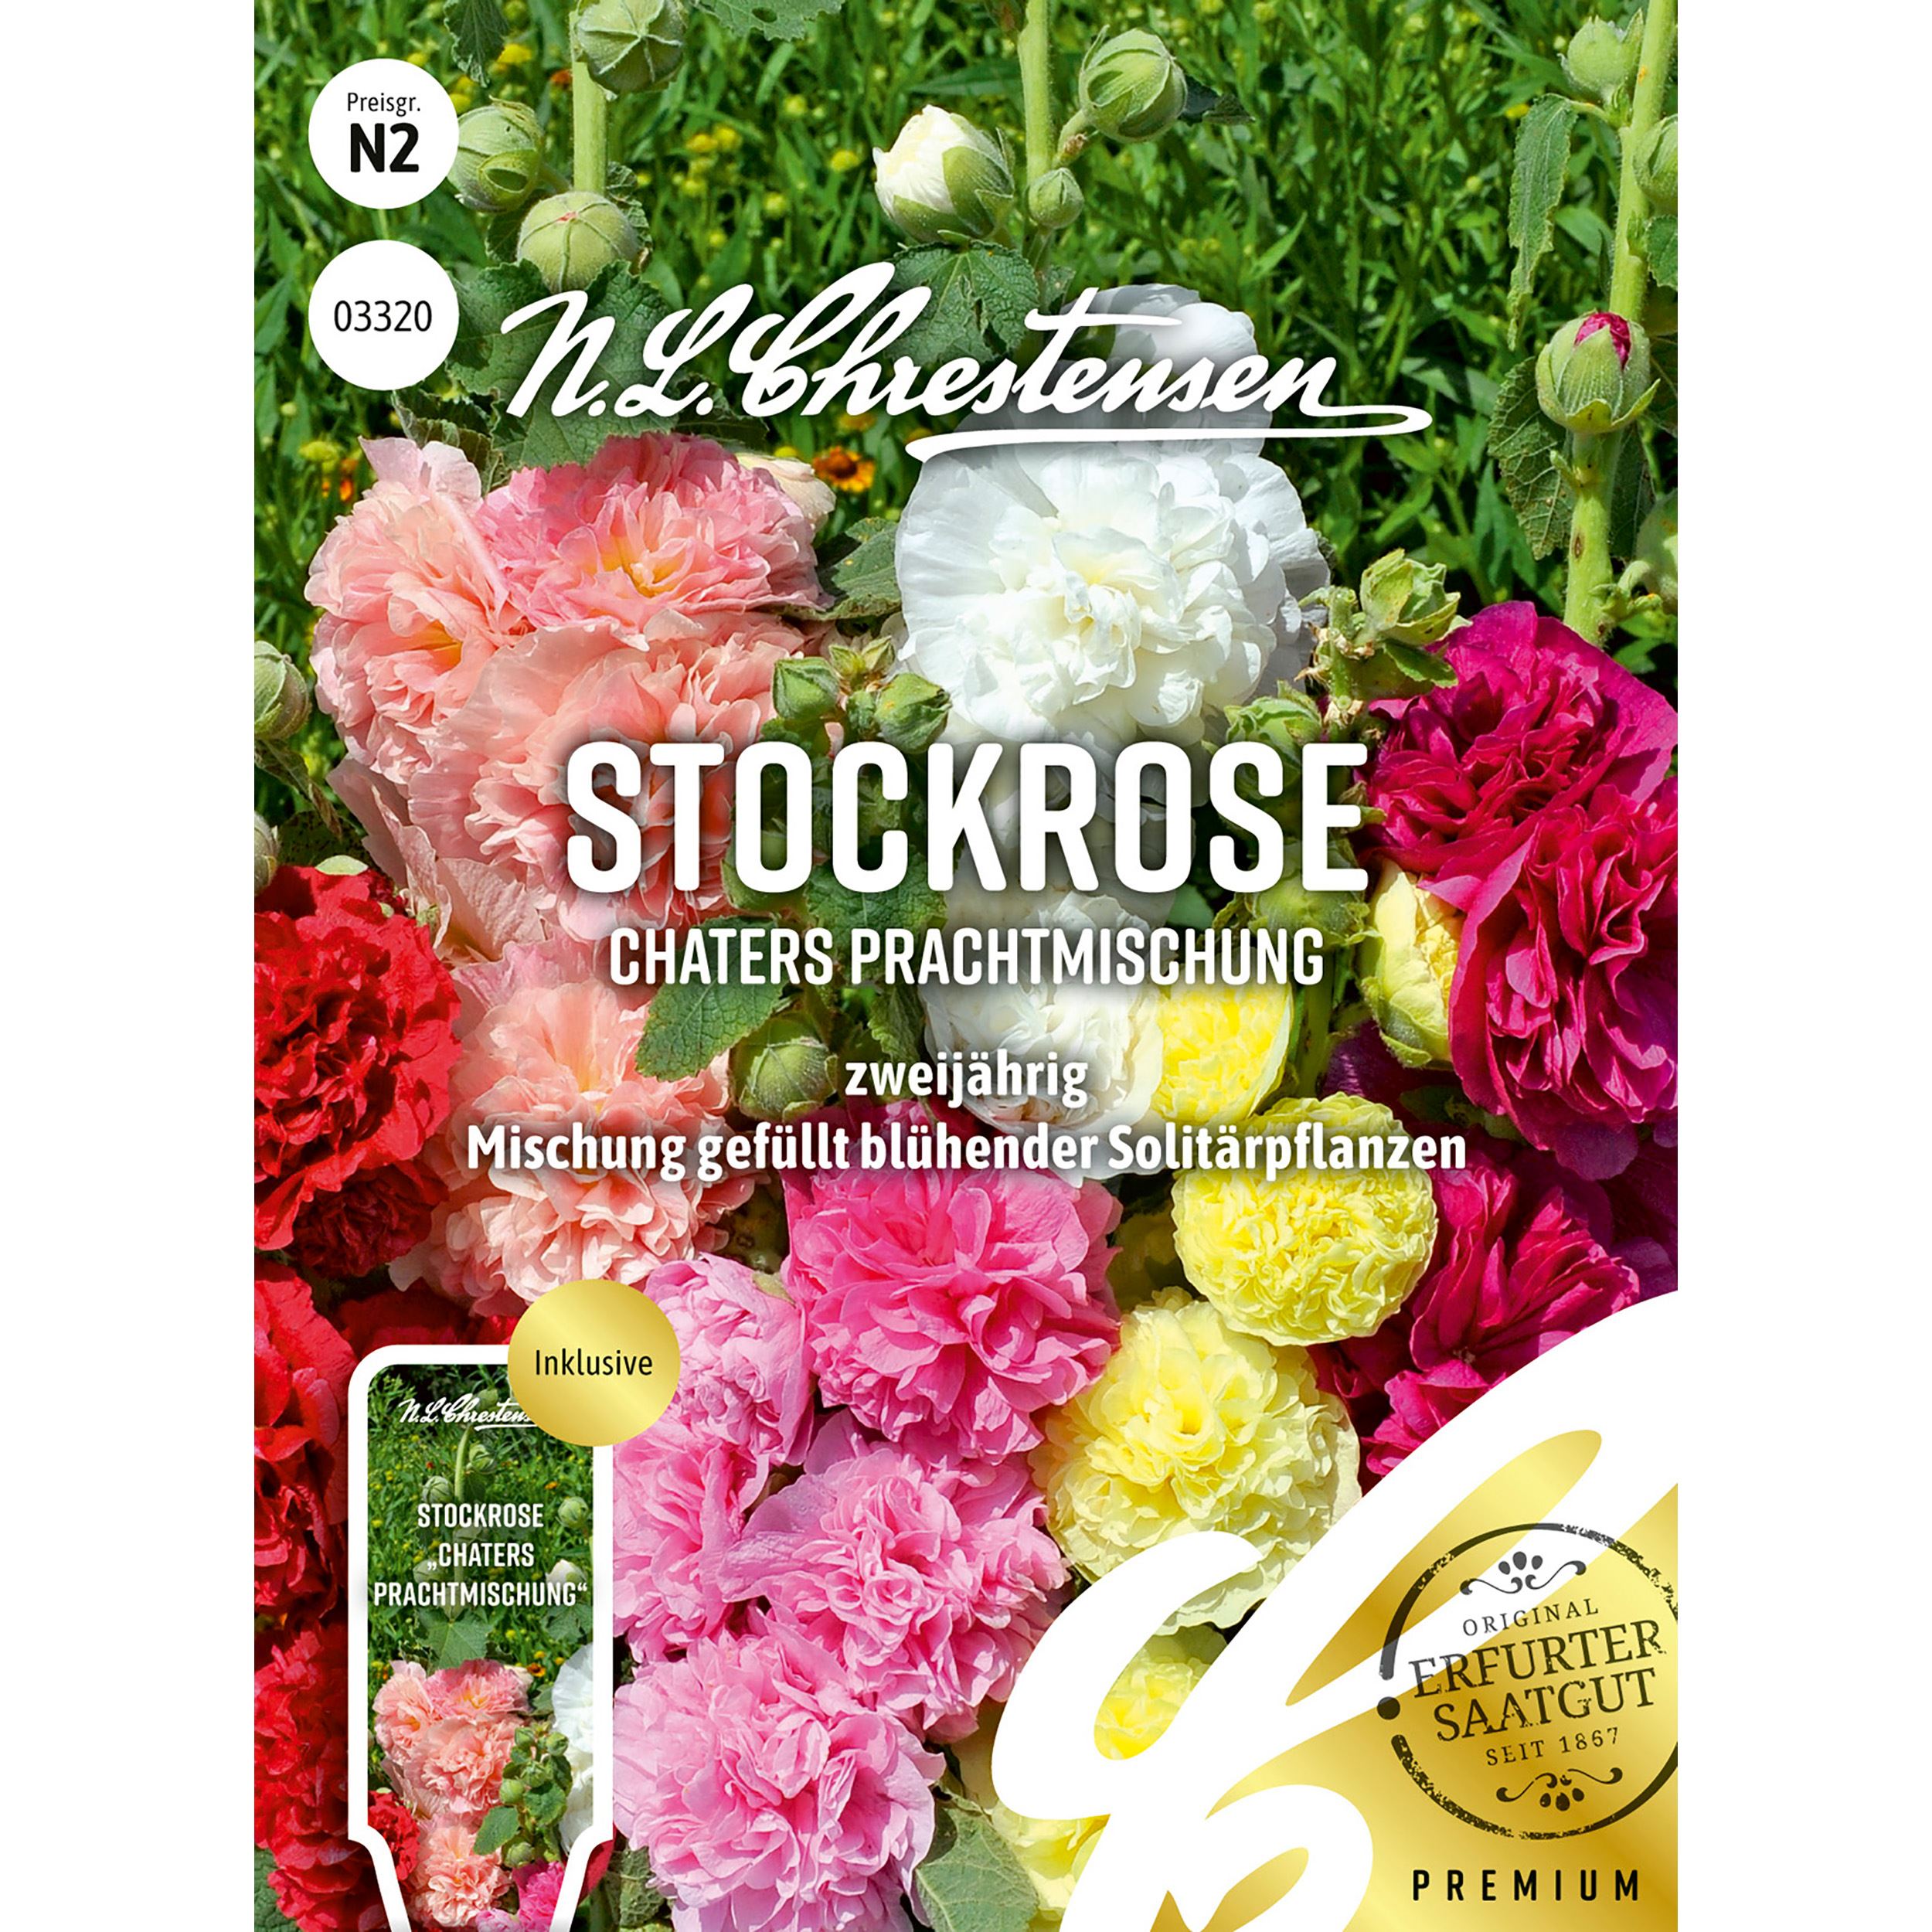 Stockrose Chaters Prachtmischung